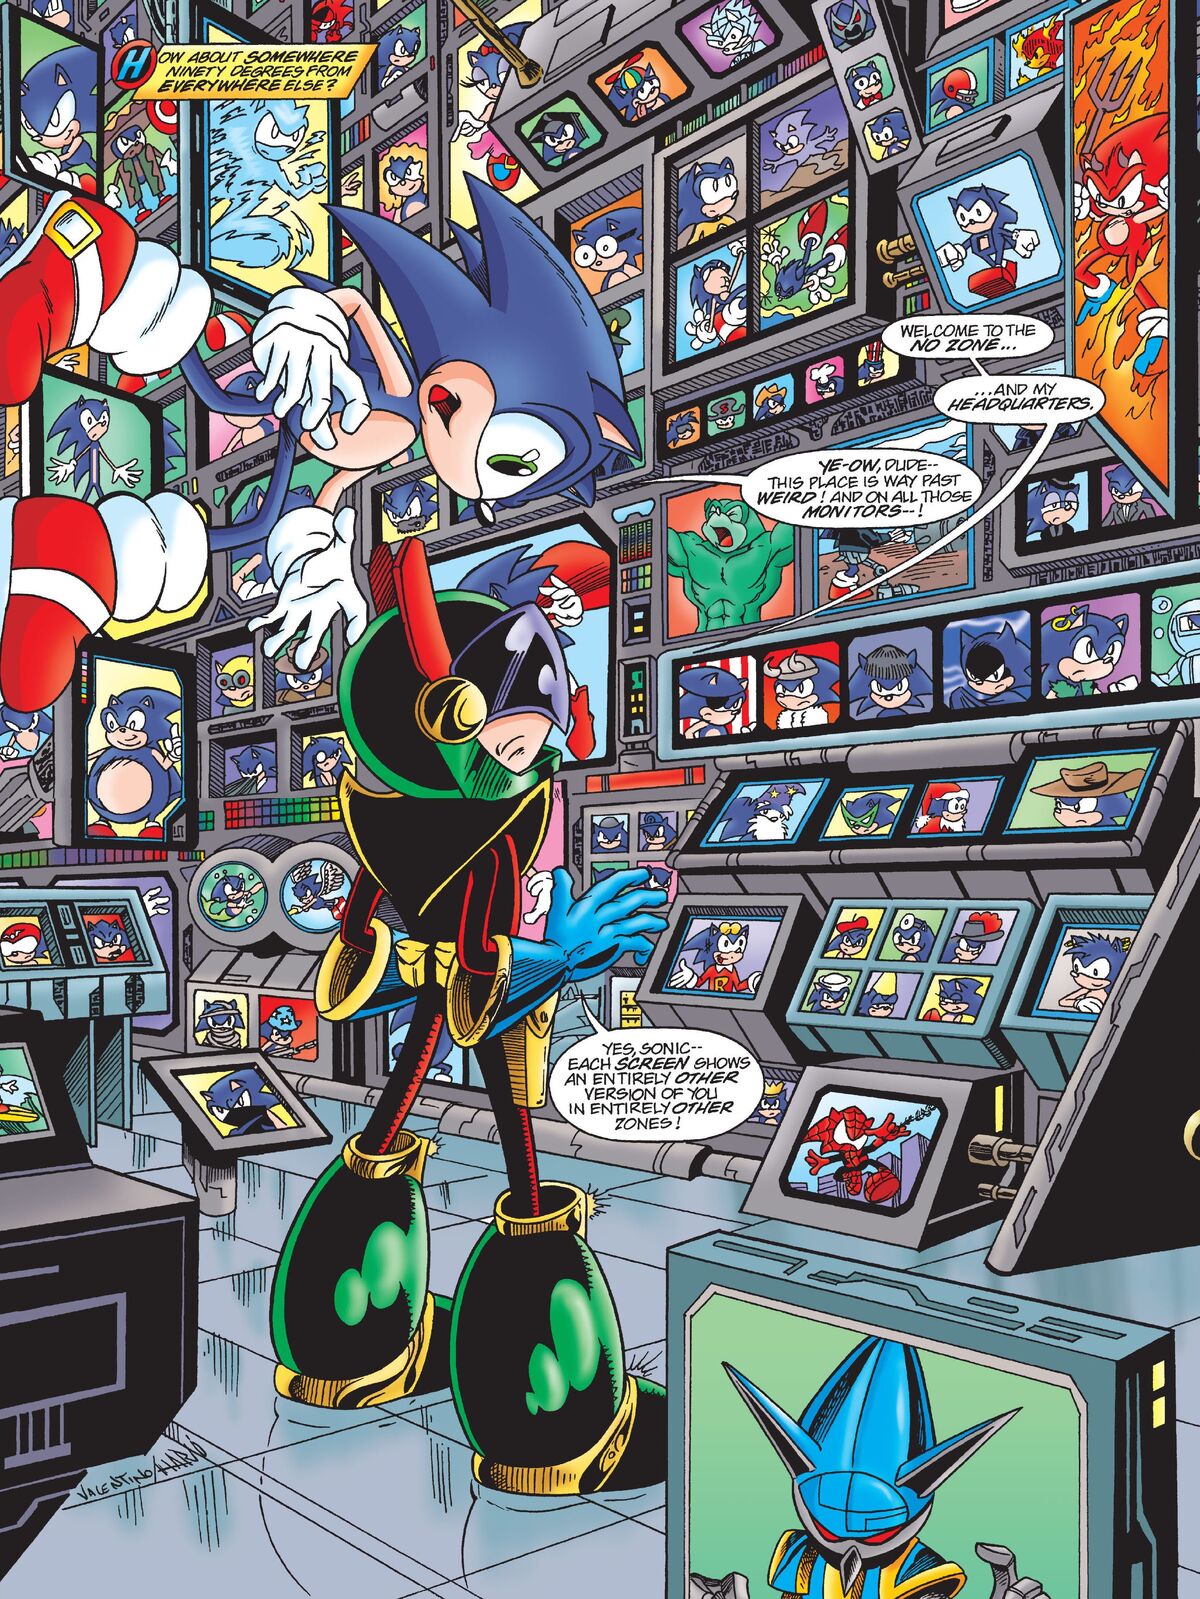 Sonic the Hedgehog 3 Archives - Murphy's Multiverse